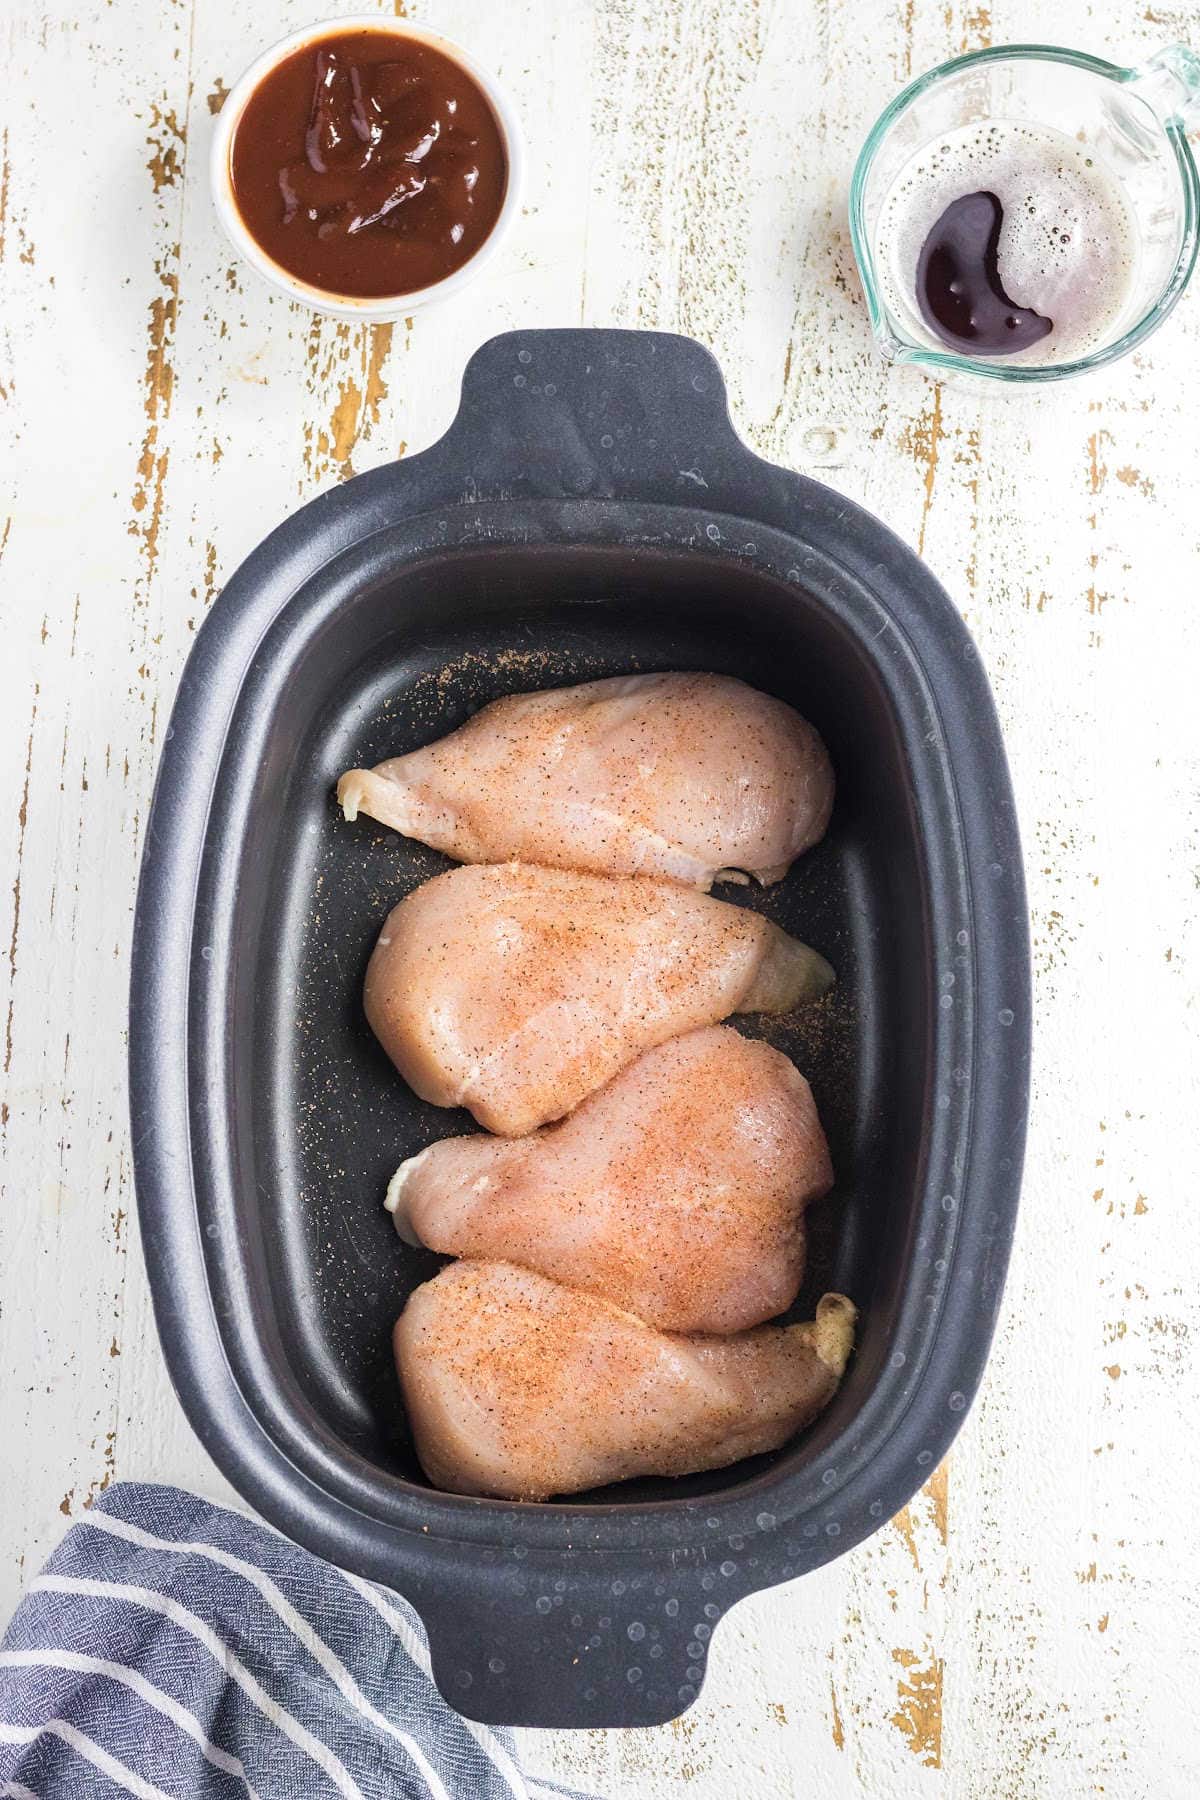 Season chicken and put in the slow cooker.